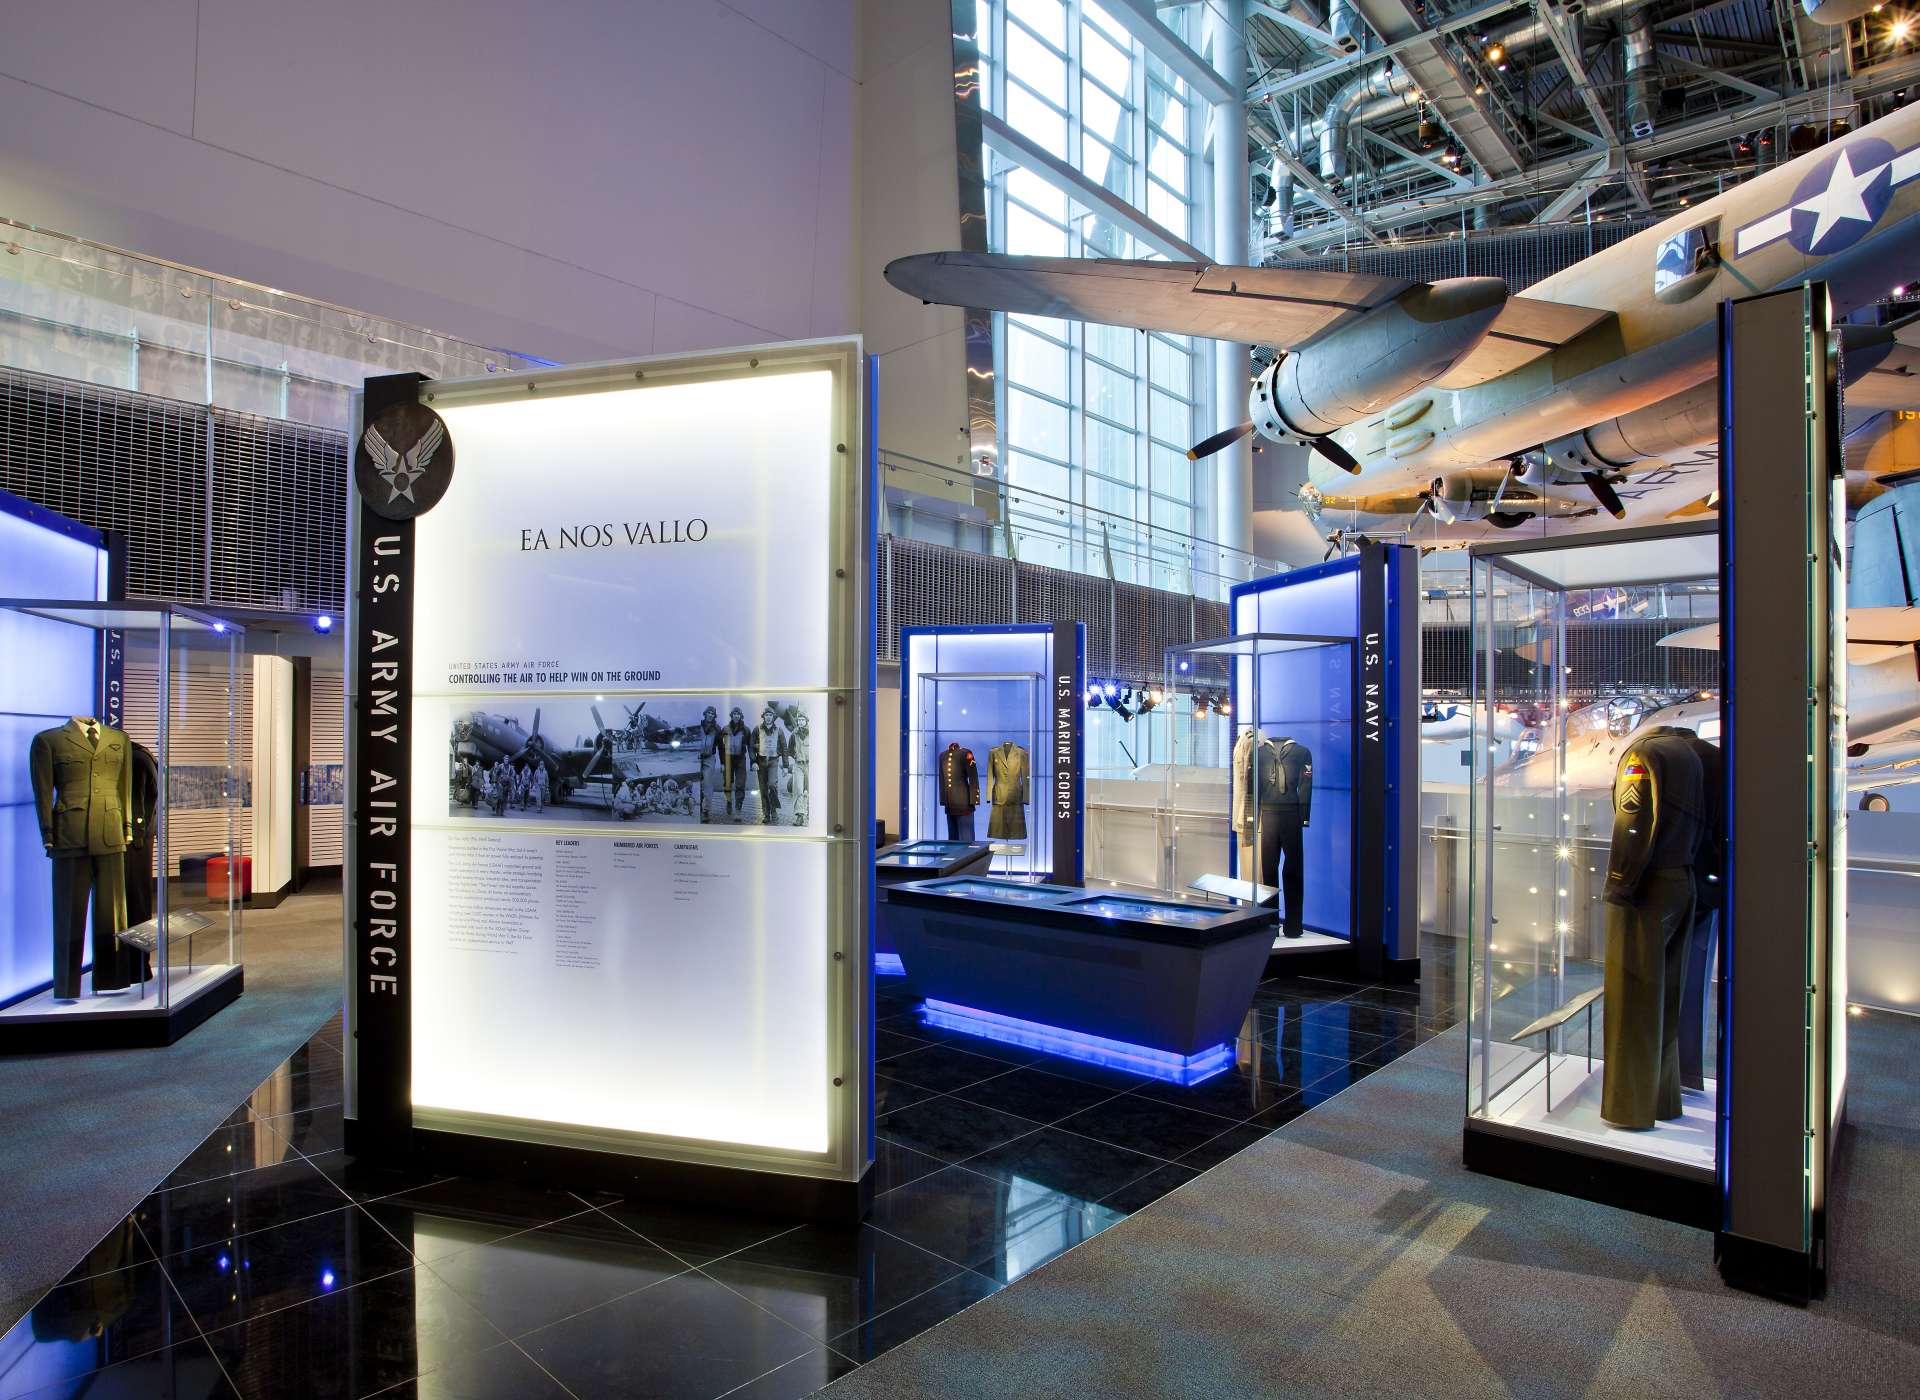 US Freedom Pavilion: the Boeing Center, Laborde Services Gallery